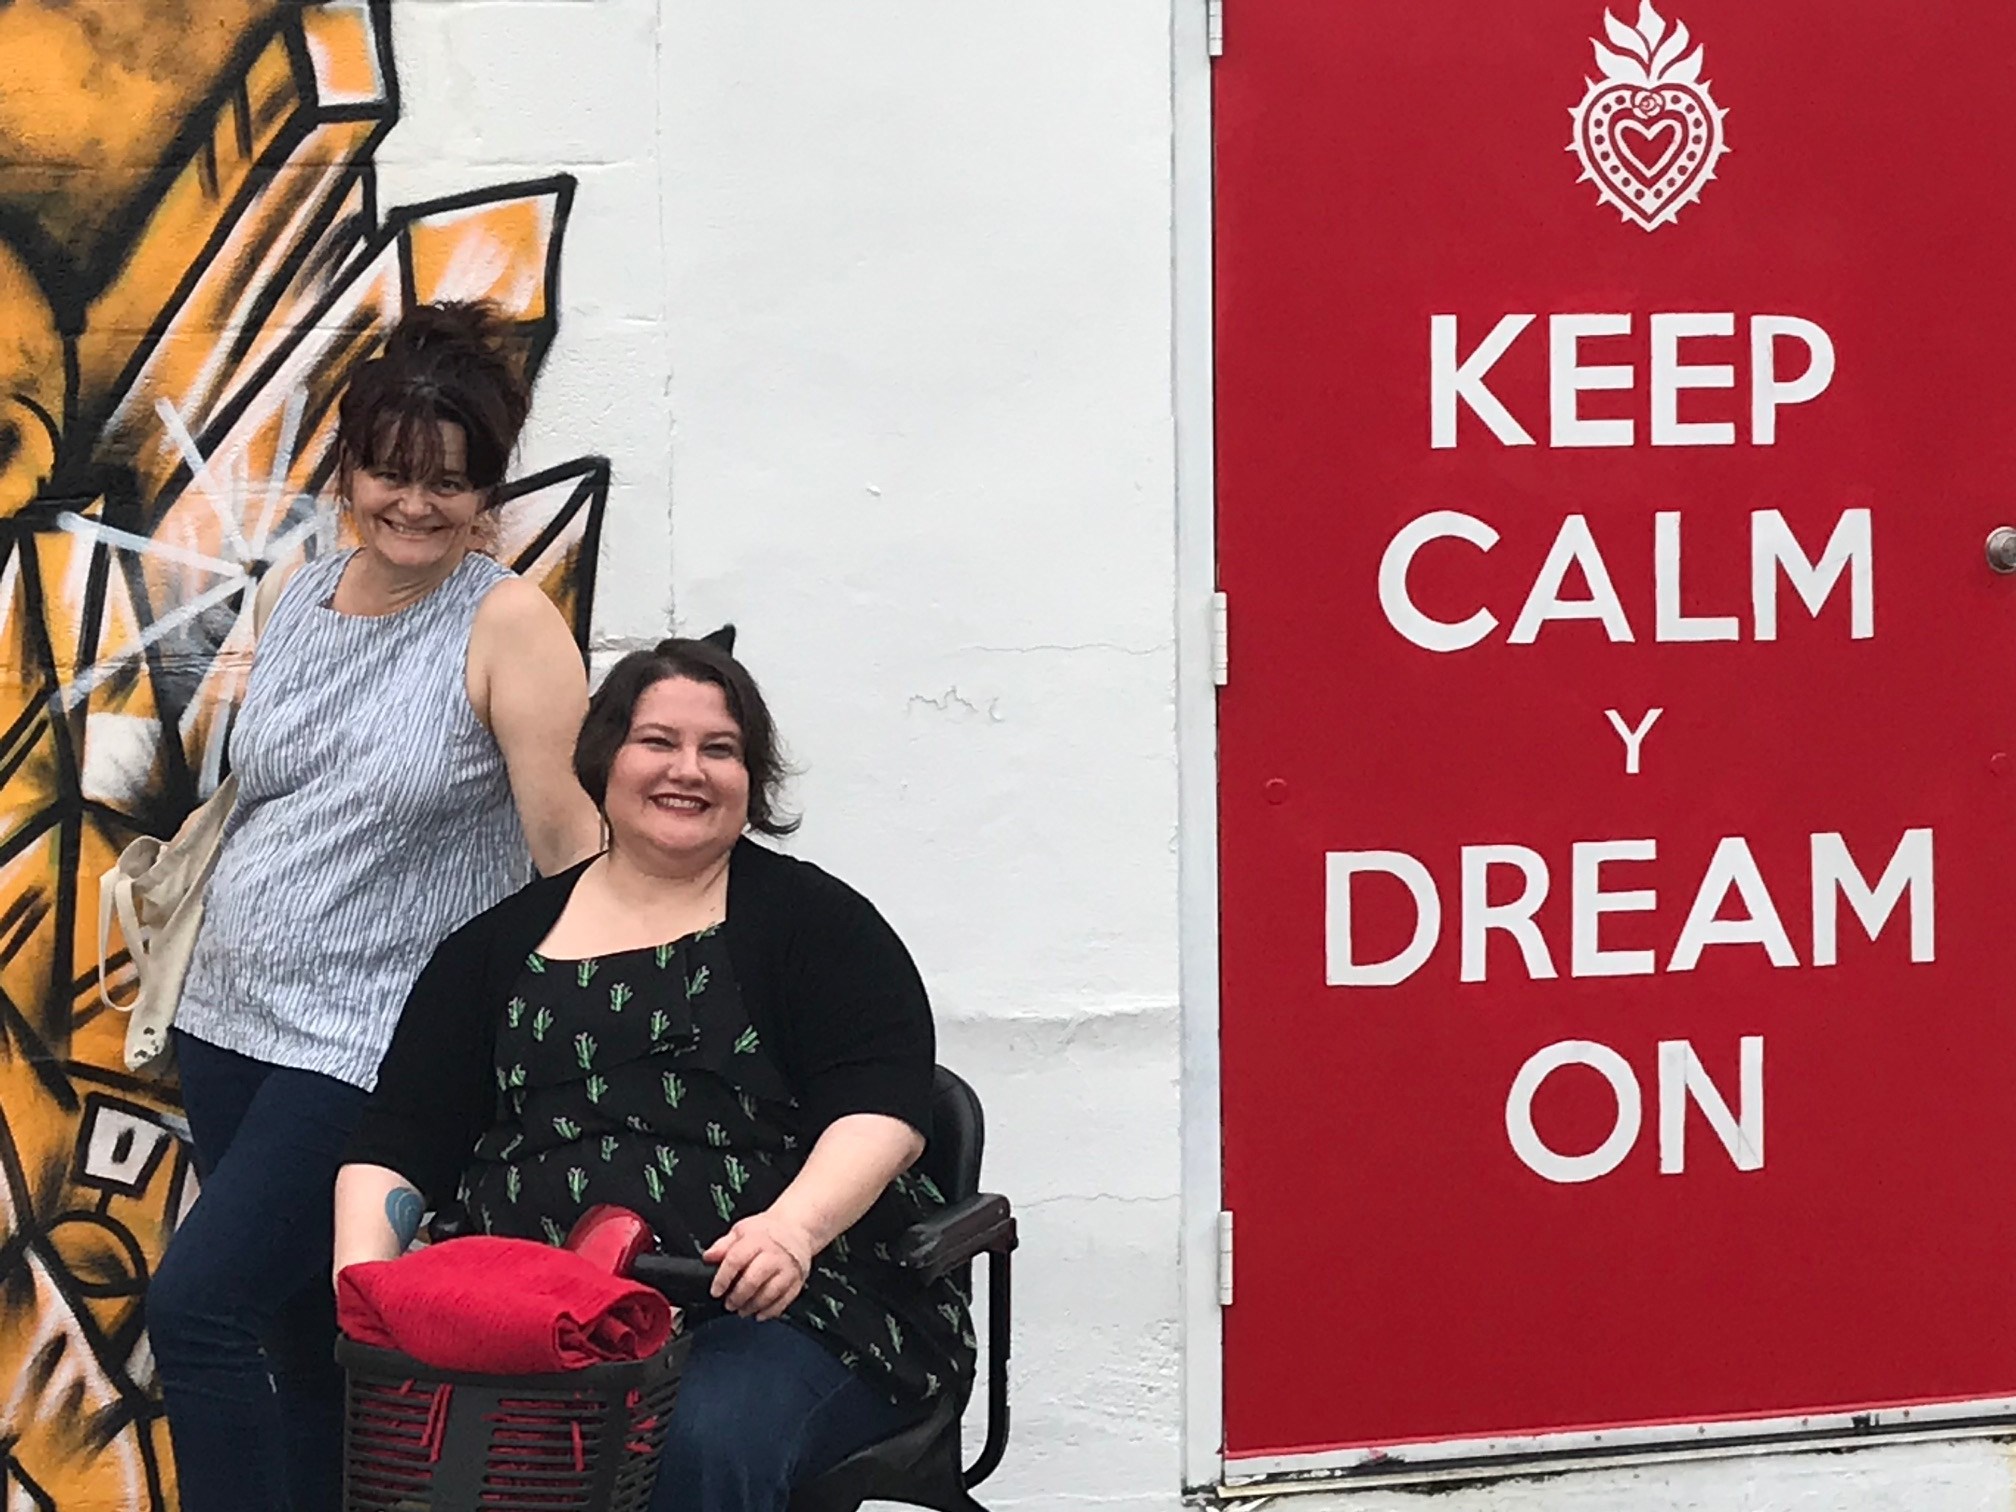                      Founder Connie Voisine poses with 2019 Conference participant beside a “Keep Calm Y Dream On” banner. 